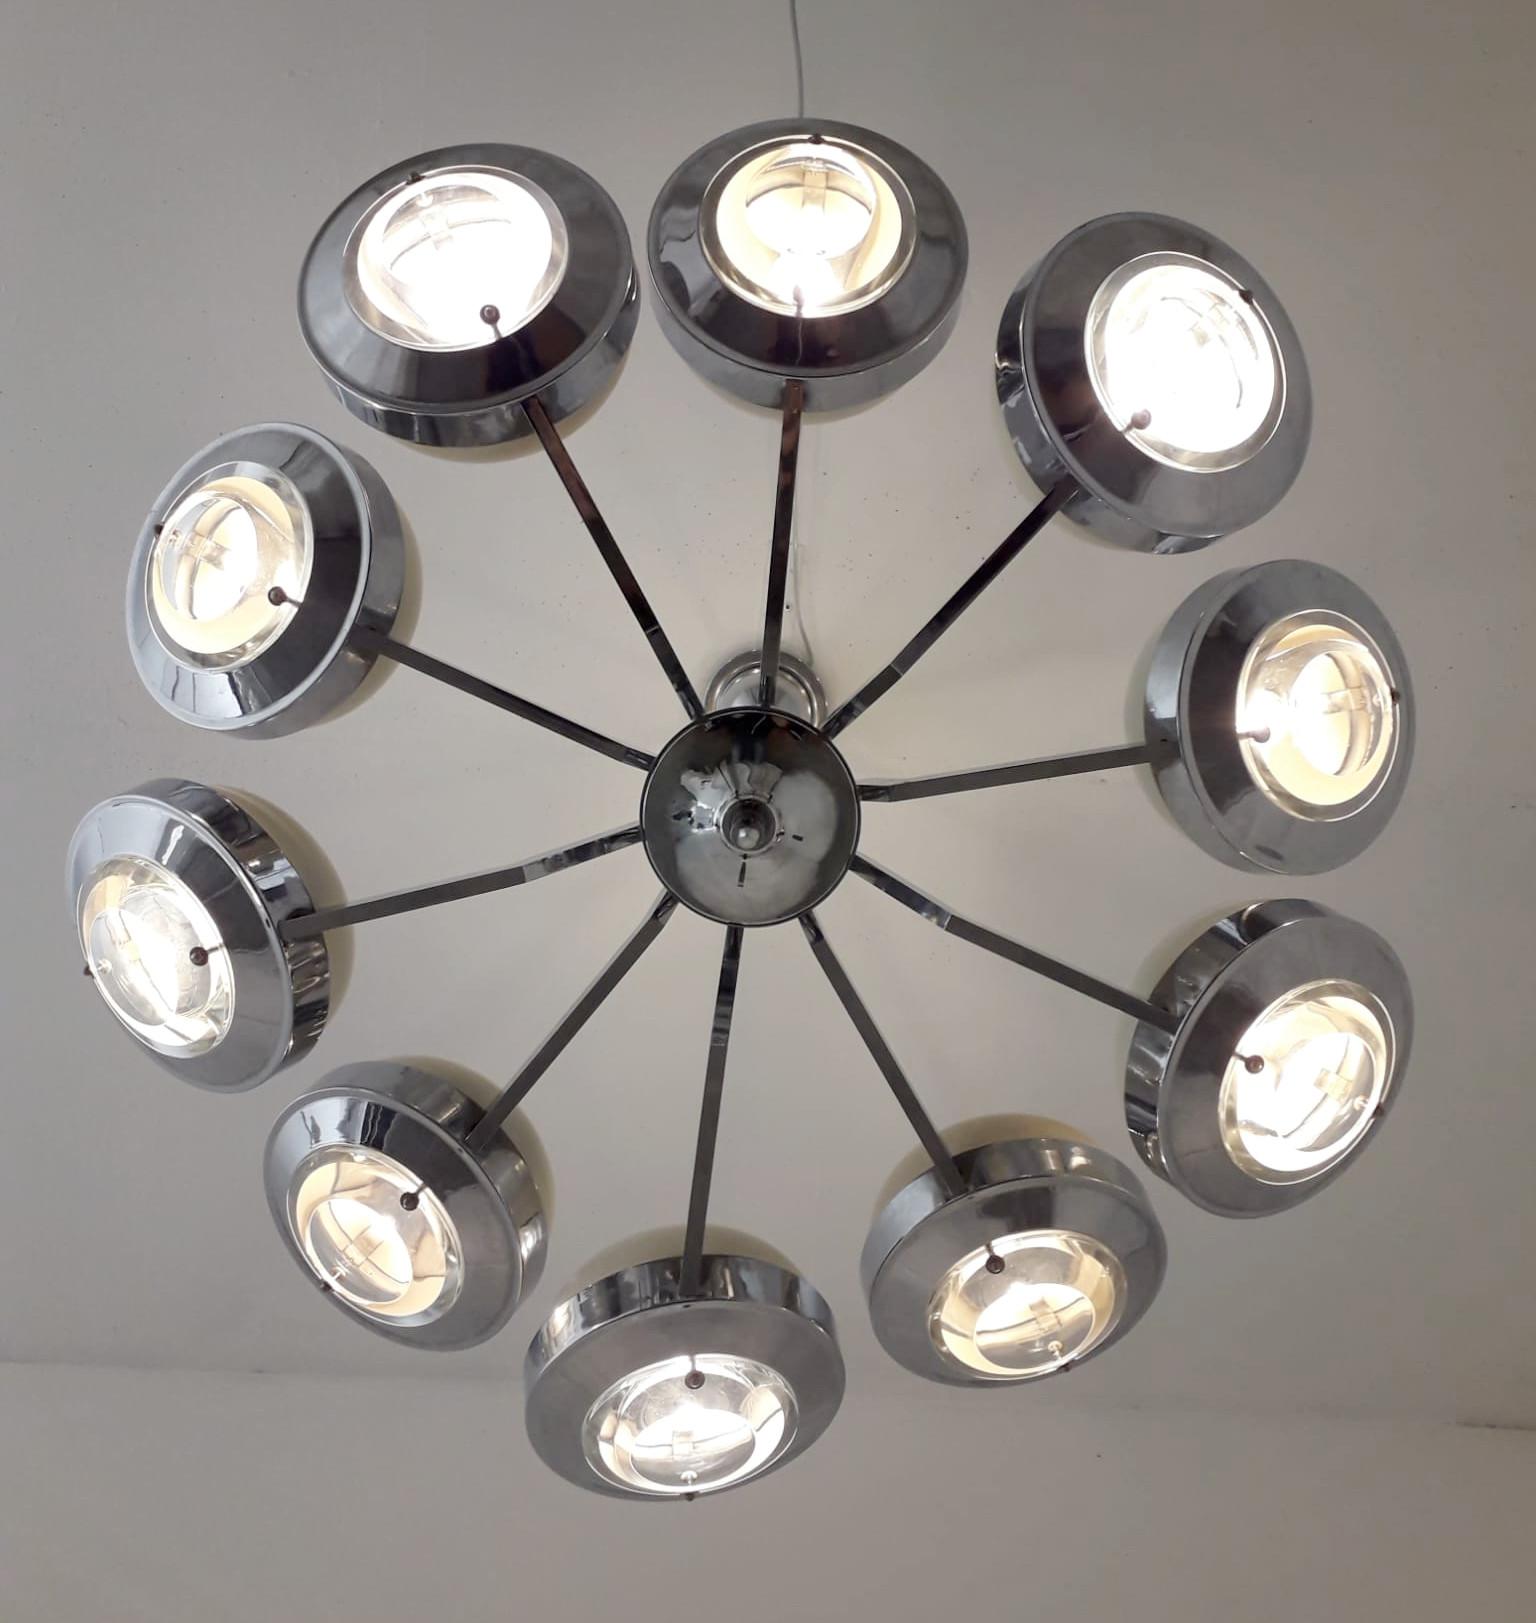 Original Italian chandelier of 10 chrome arms with glass lens diffusers and enameled metal shades by Torlasco / Made in Italy circa 1970s
Measures: diameter 31.5 inches, height 32.5 inches including rod and canopy
10 lights / E12 type / max 40W